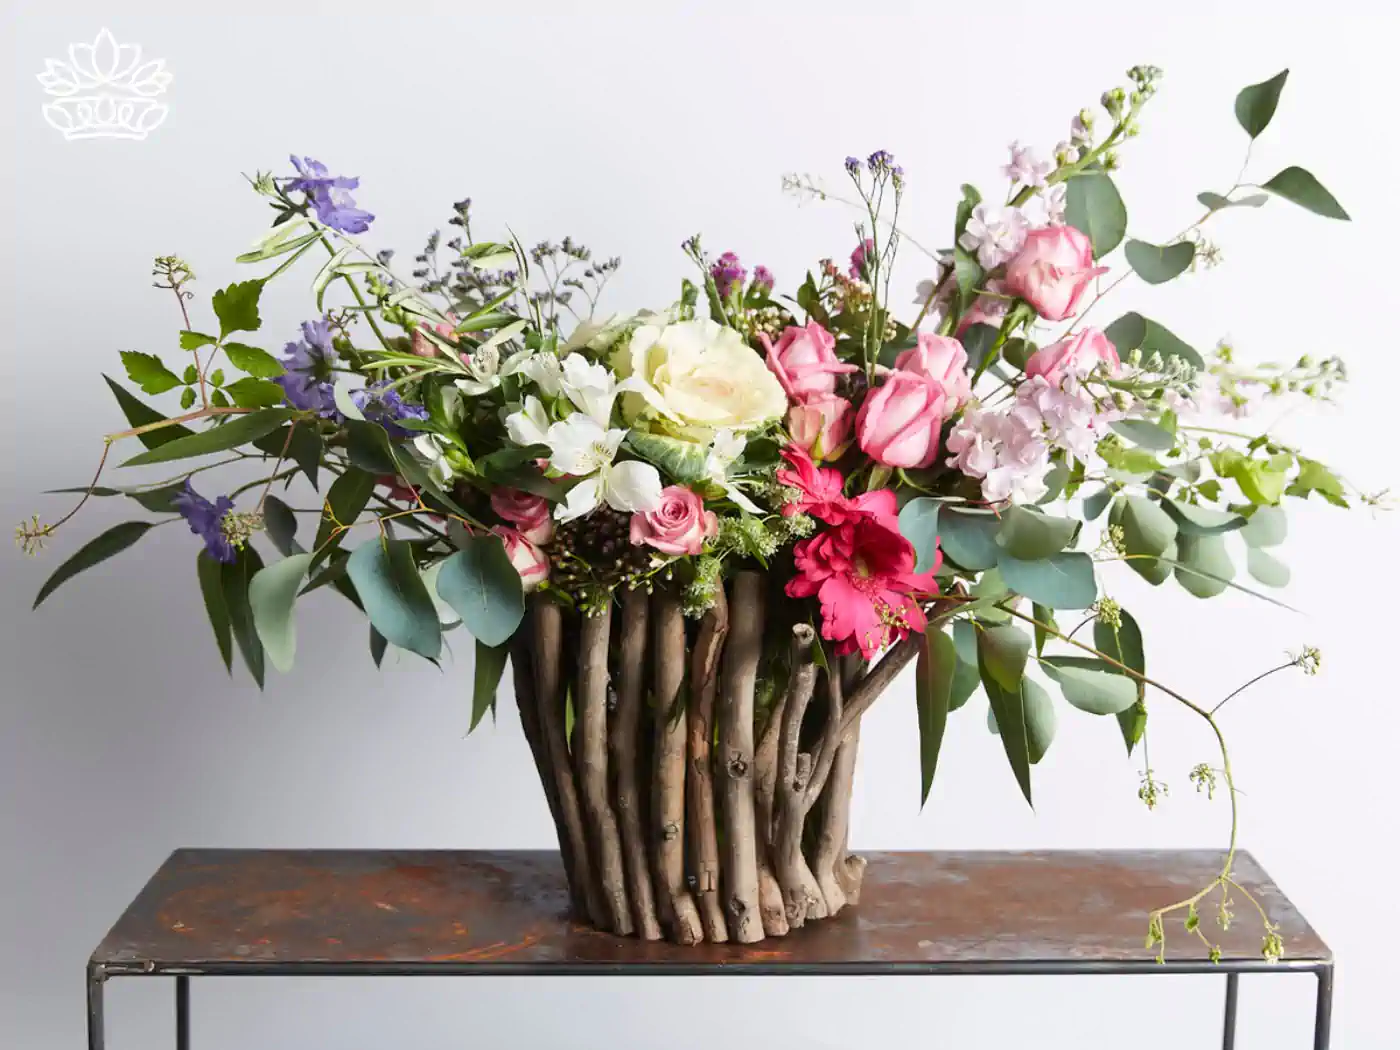 A rustic wooden vase filled with a delicate blend of pink roses, white blossoms, and subtle blue flowers, presenting a natural yet refined look perfect for a front desk reception desk.